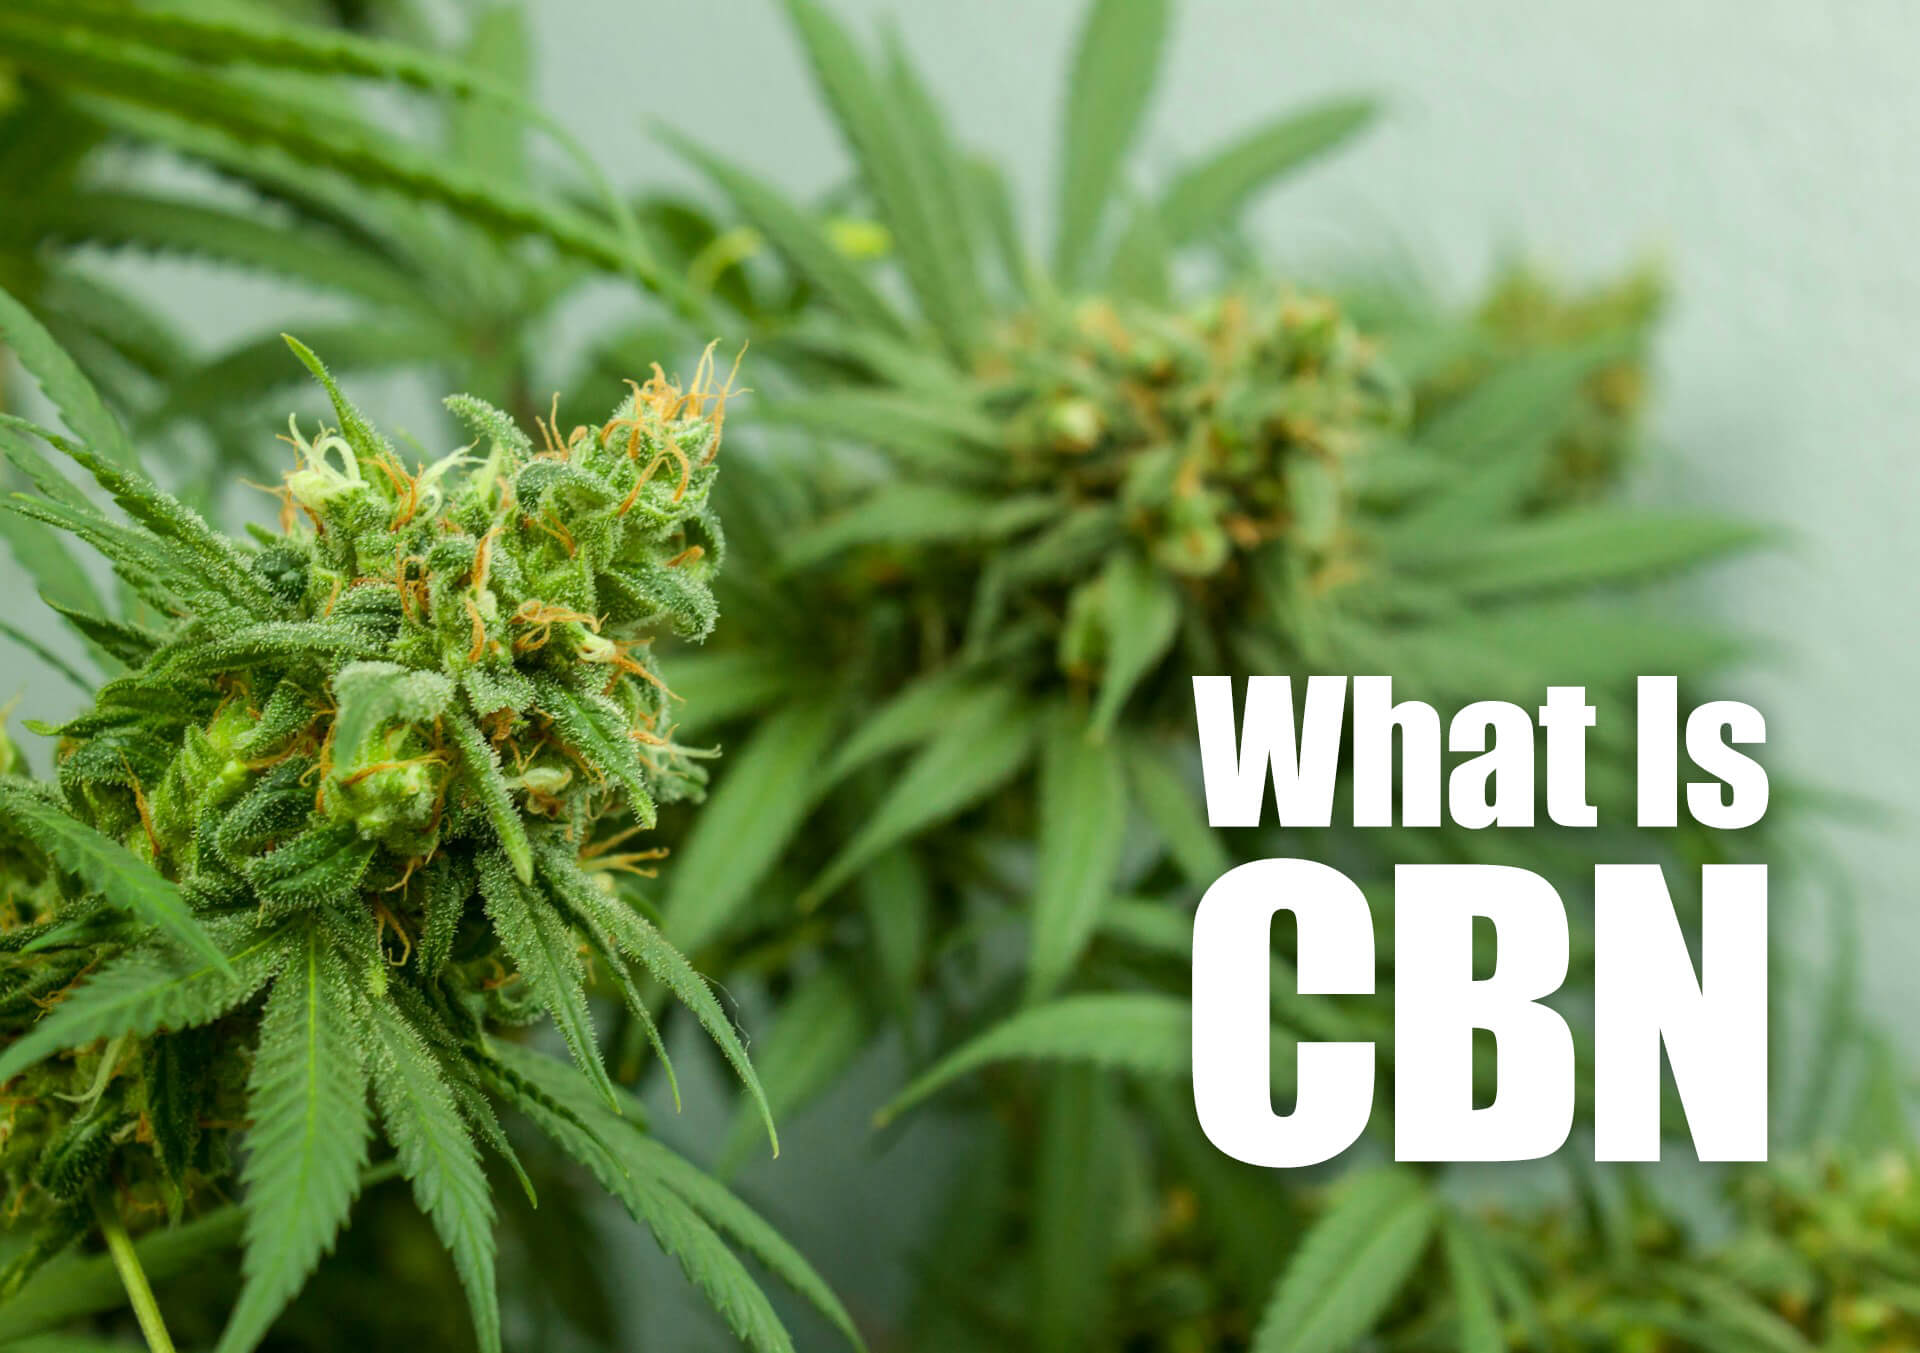 What is CBN and what is the difference between CBN and CBD?